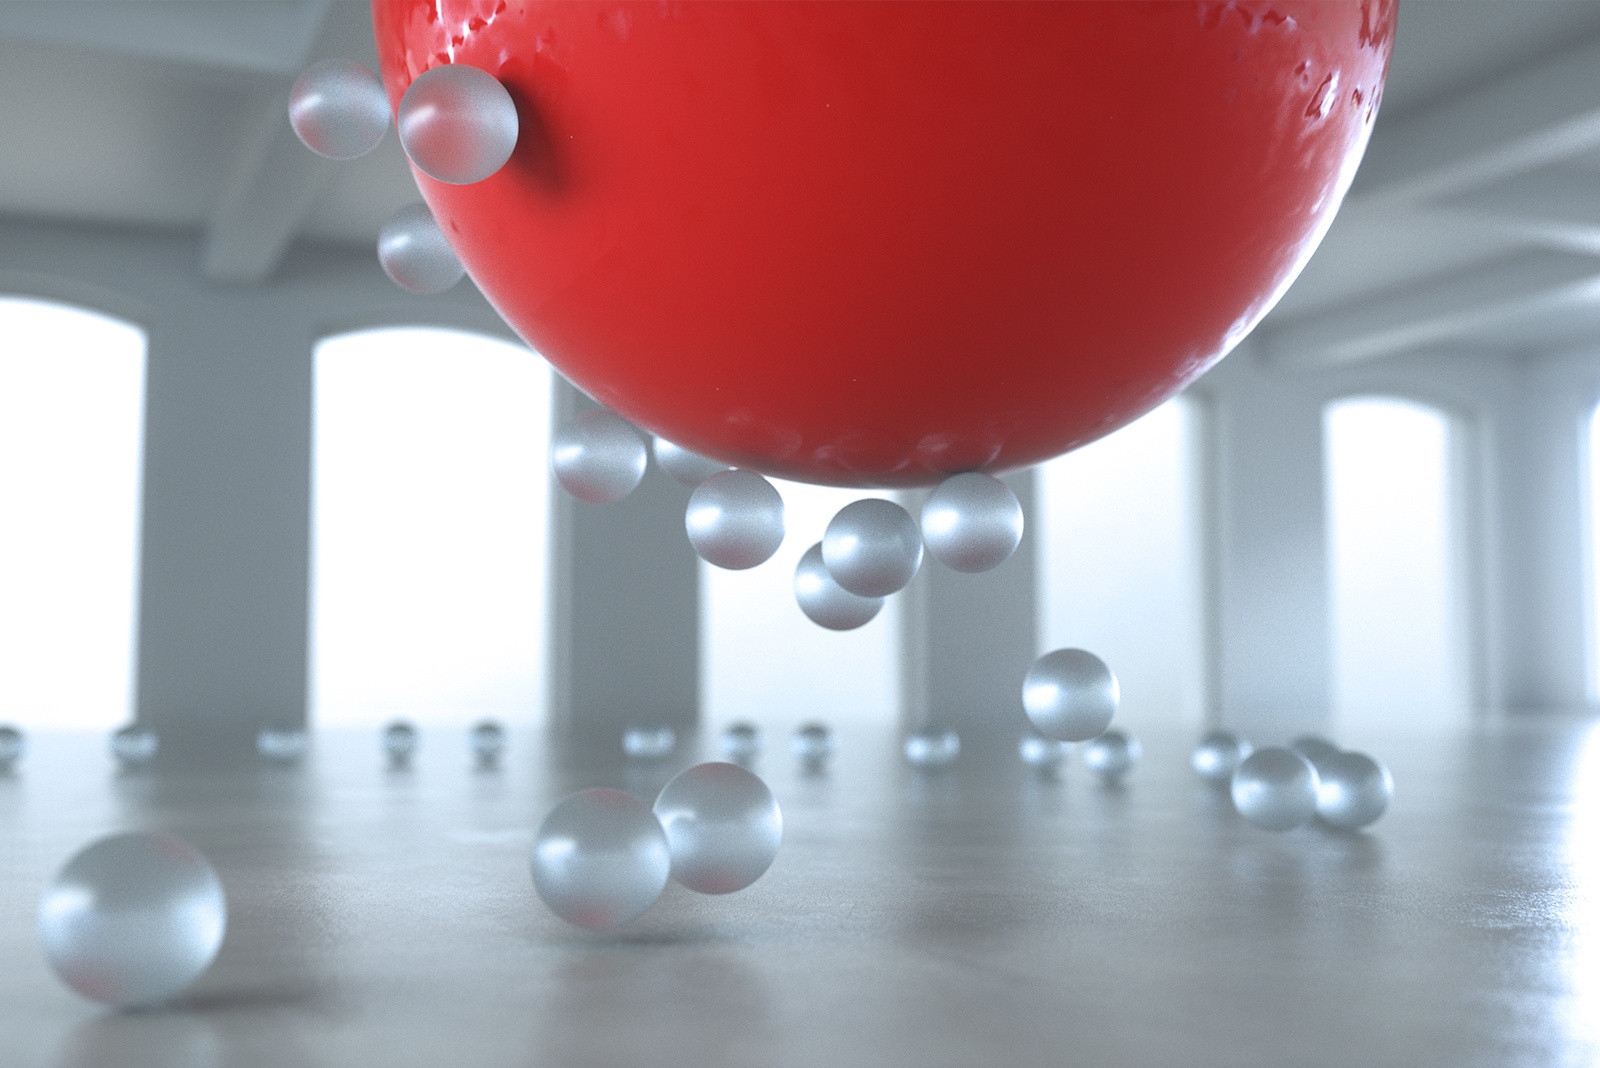 A creative concept showing small opaque spheres swarming around a large red sphere.